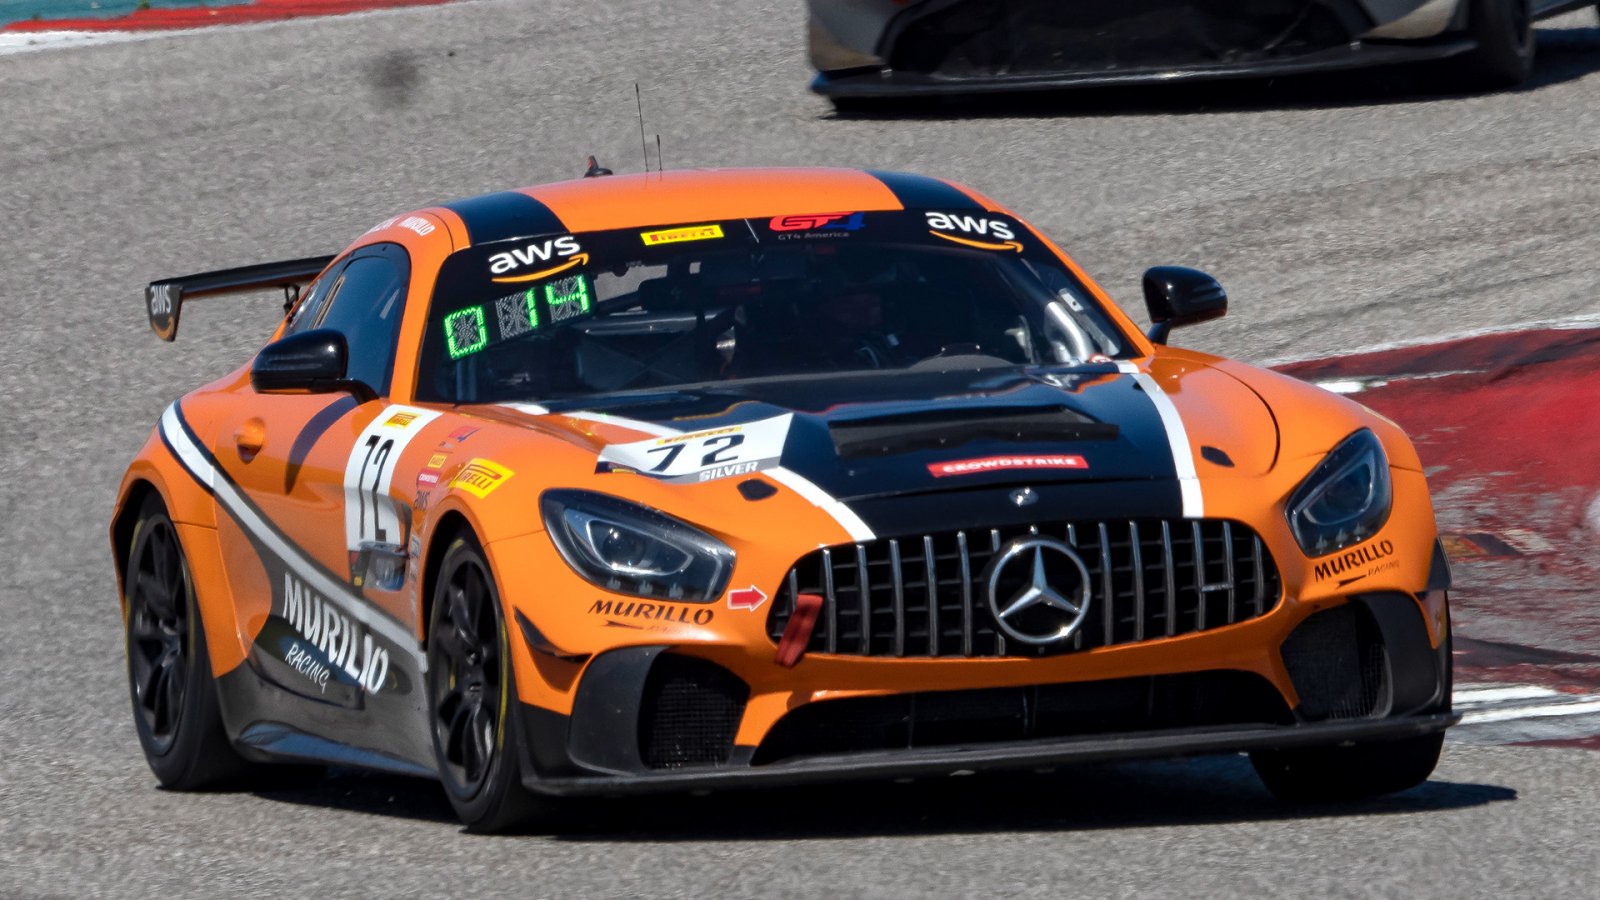 10 Mercedes-AMG Motorsport Customer Racing Entries Lead Three SRO America Class Championships Heading into Mid-Season Weekend of Competition at VIR